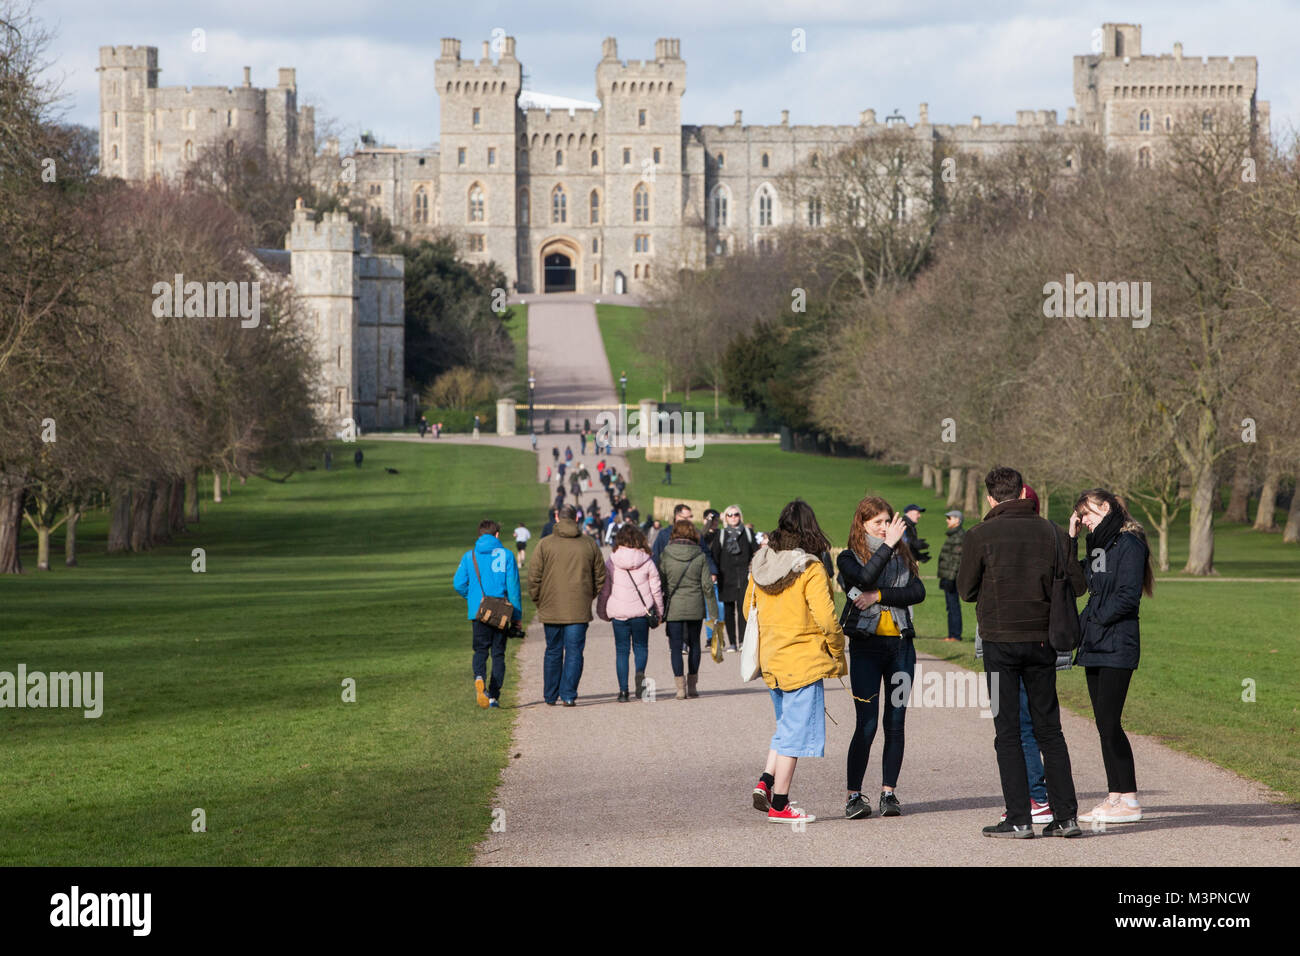 Windsor, UK. 12th February, 2018. Visitors and local residents enjoy a stroll on the Long Walk in Windsor Great Park. Kensington Palace has announced that Prince Harry and Meghan Markle will carry out a tour of Windsor after their wedding in St George's Chapel, returning to Windsor Castle along the Long Walk for their wedding reception. Credit: Mark Kerrison/Alamy Live News Stock Photo